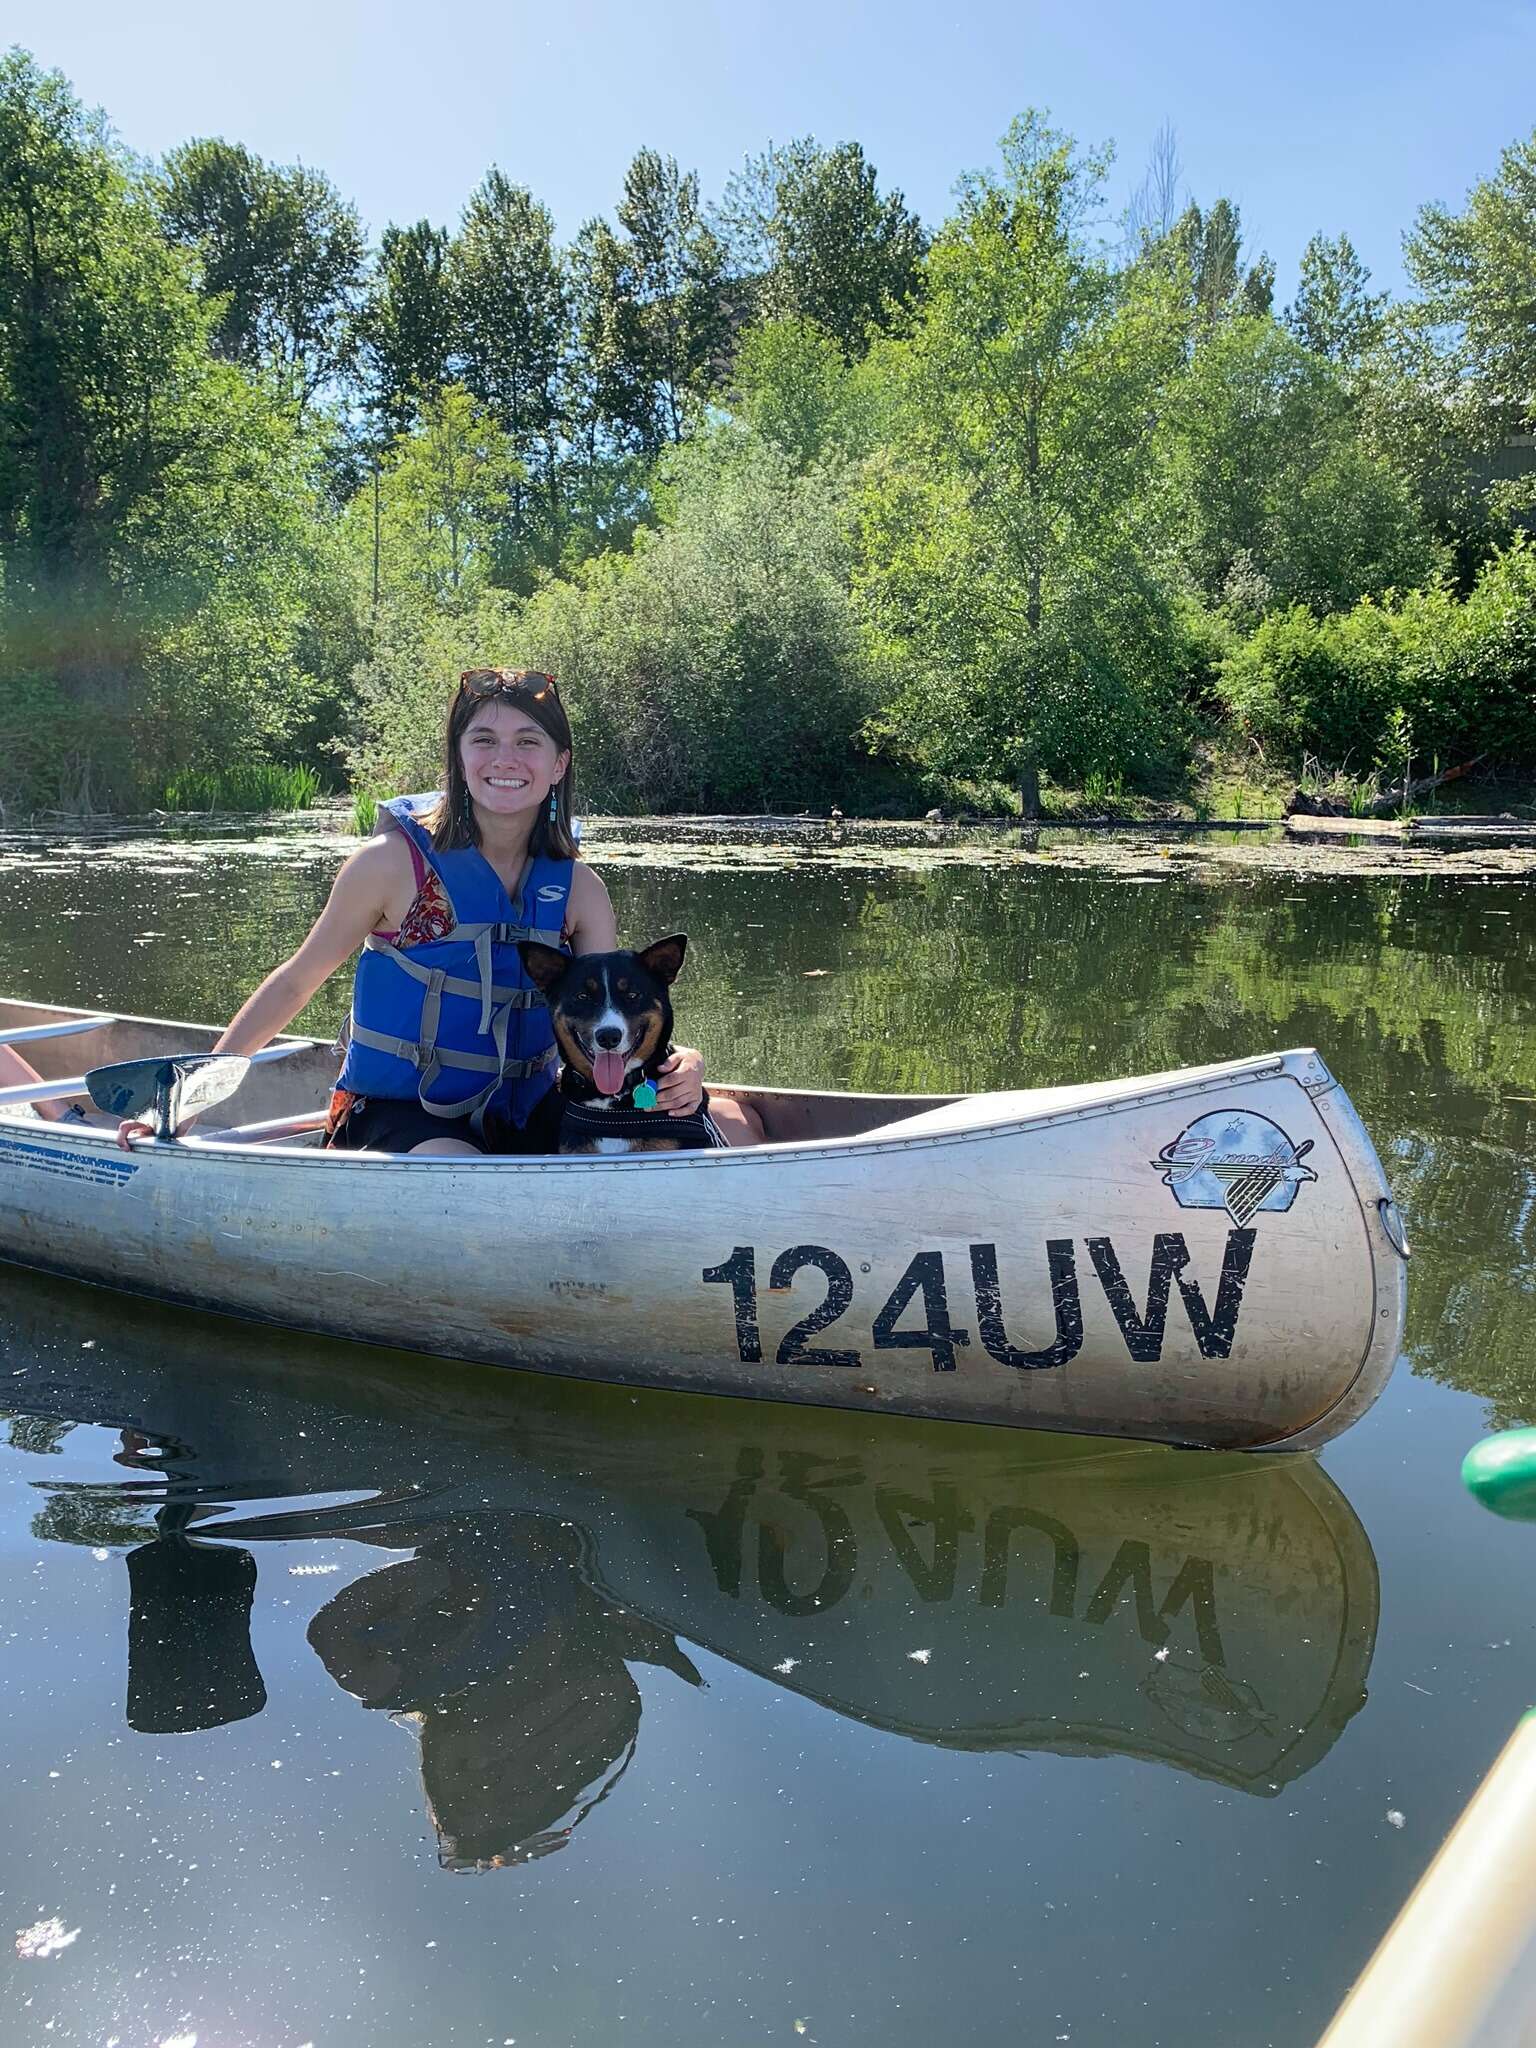 Yunue Moore and her dog Clue on a lake in Washington State